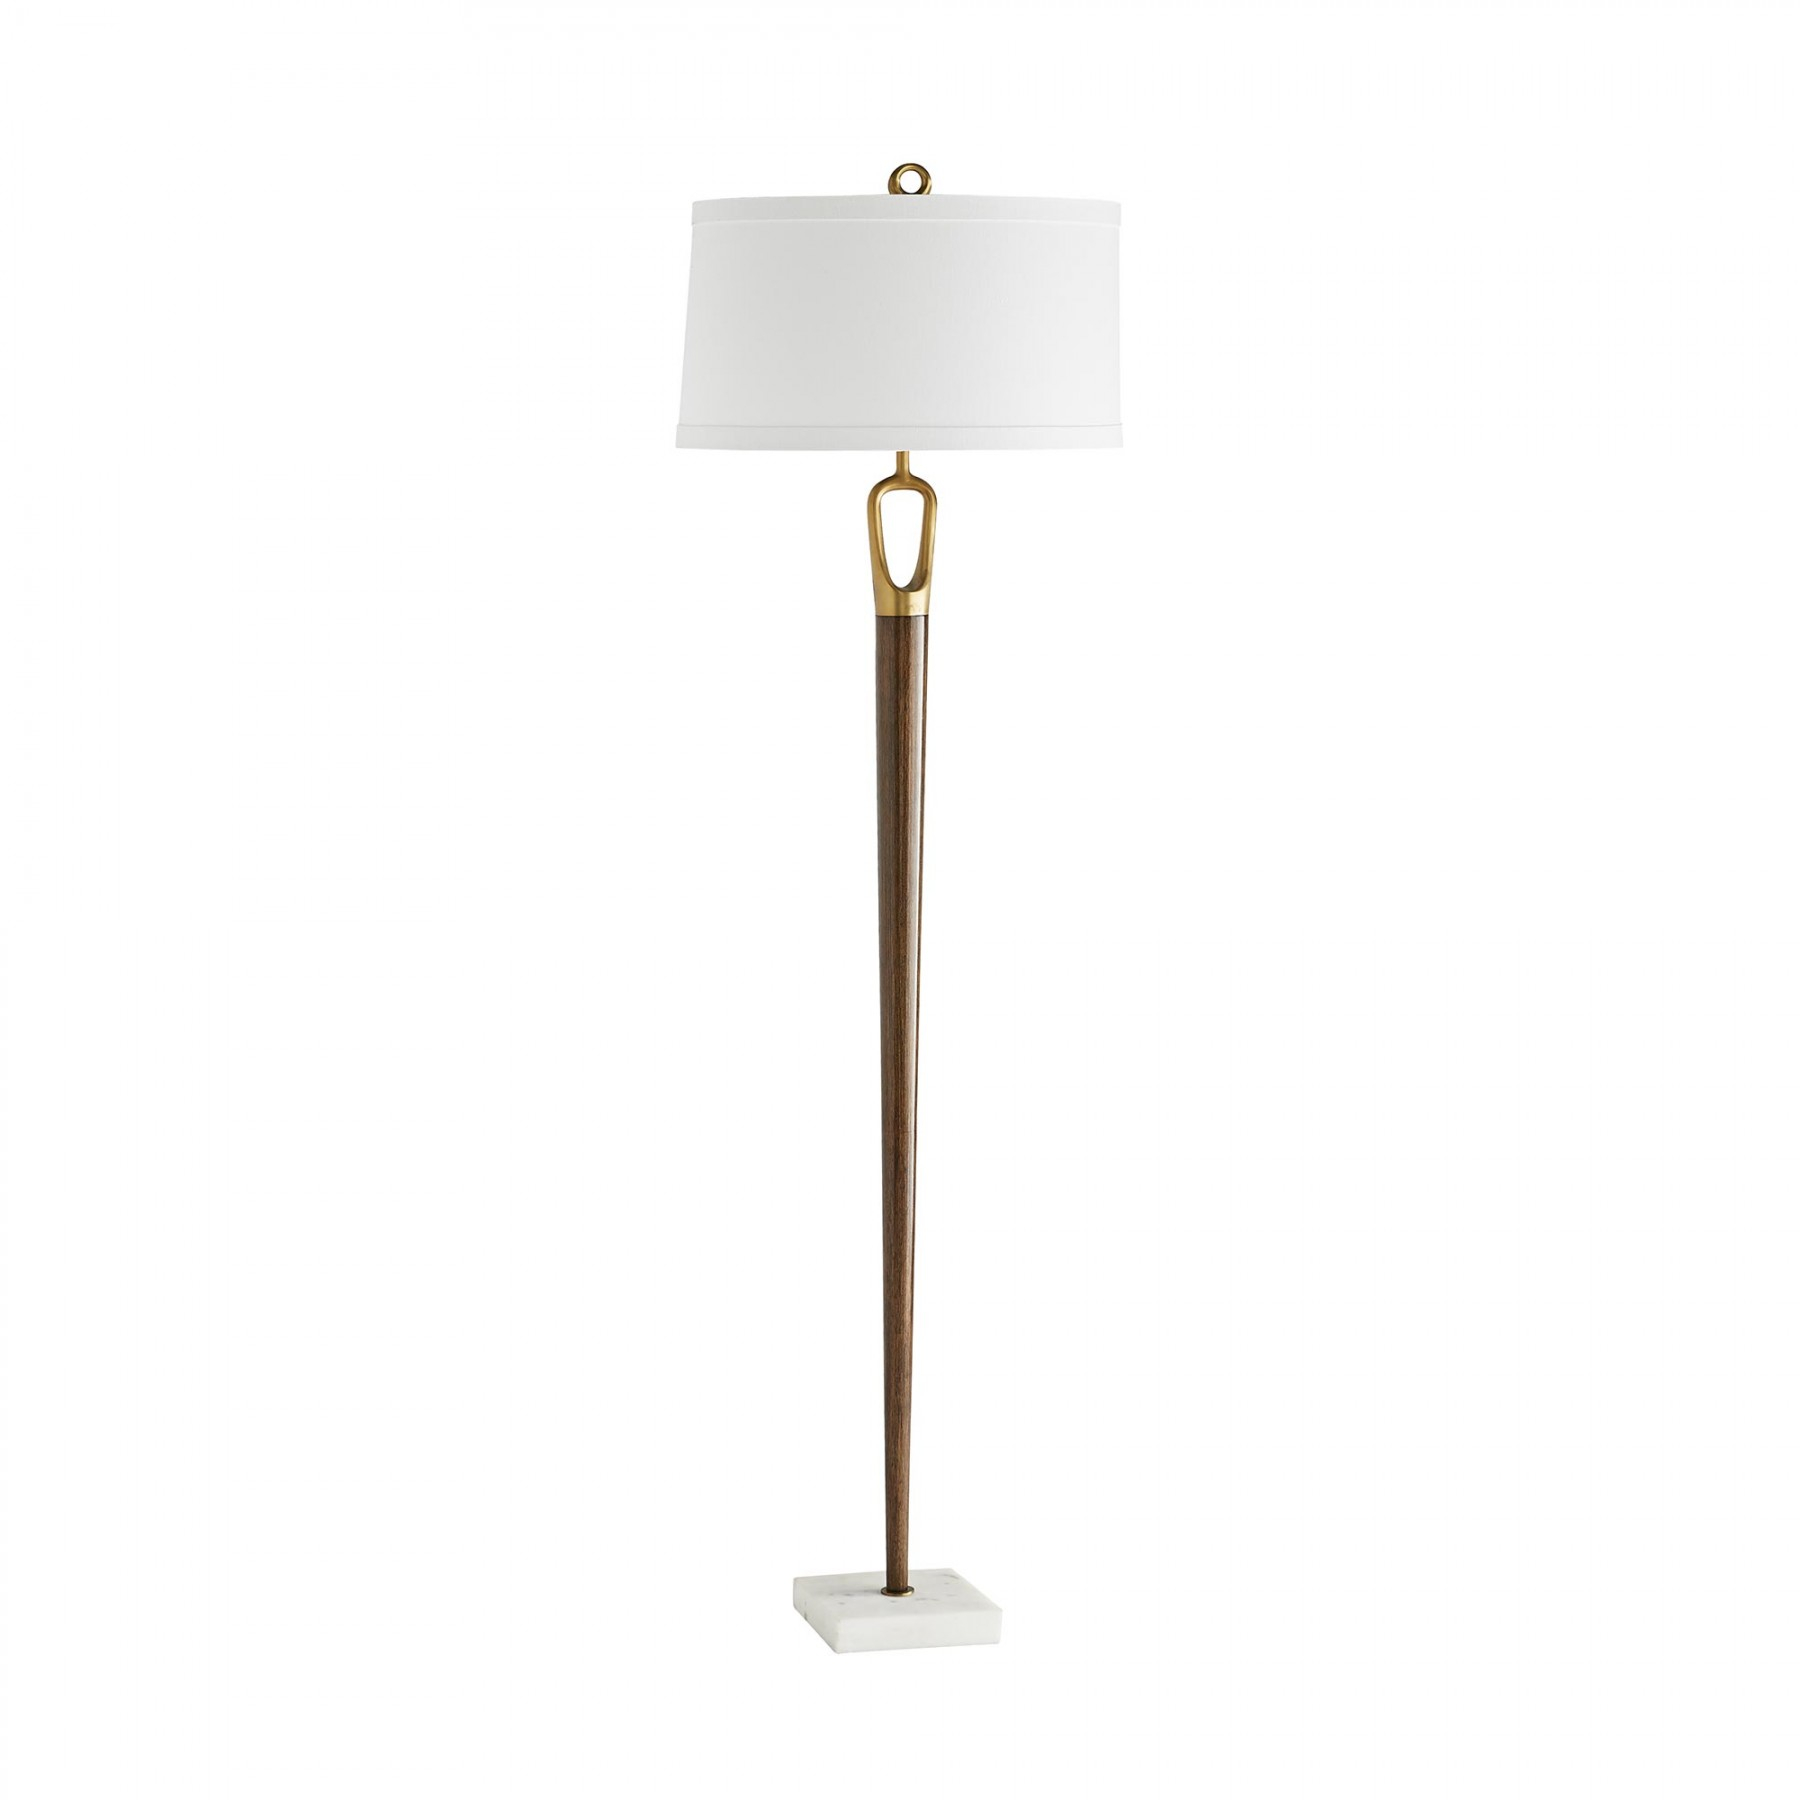 Manor Floor Lamp throughout size 1800 X 1800